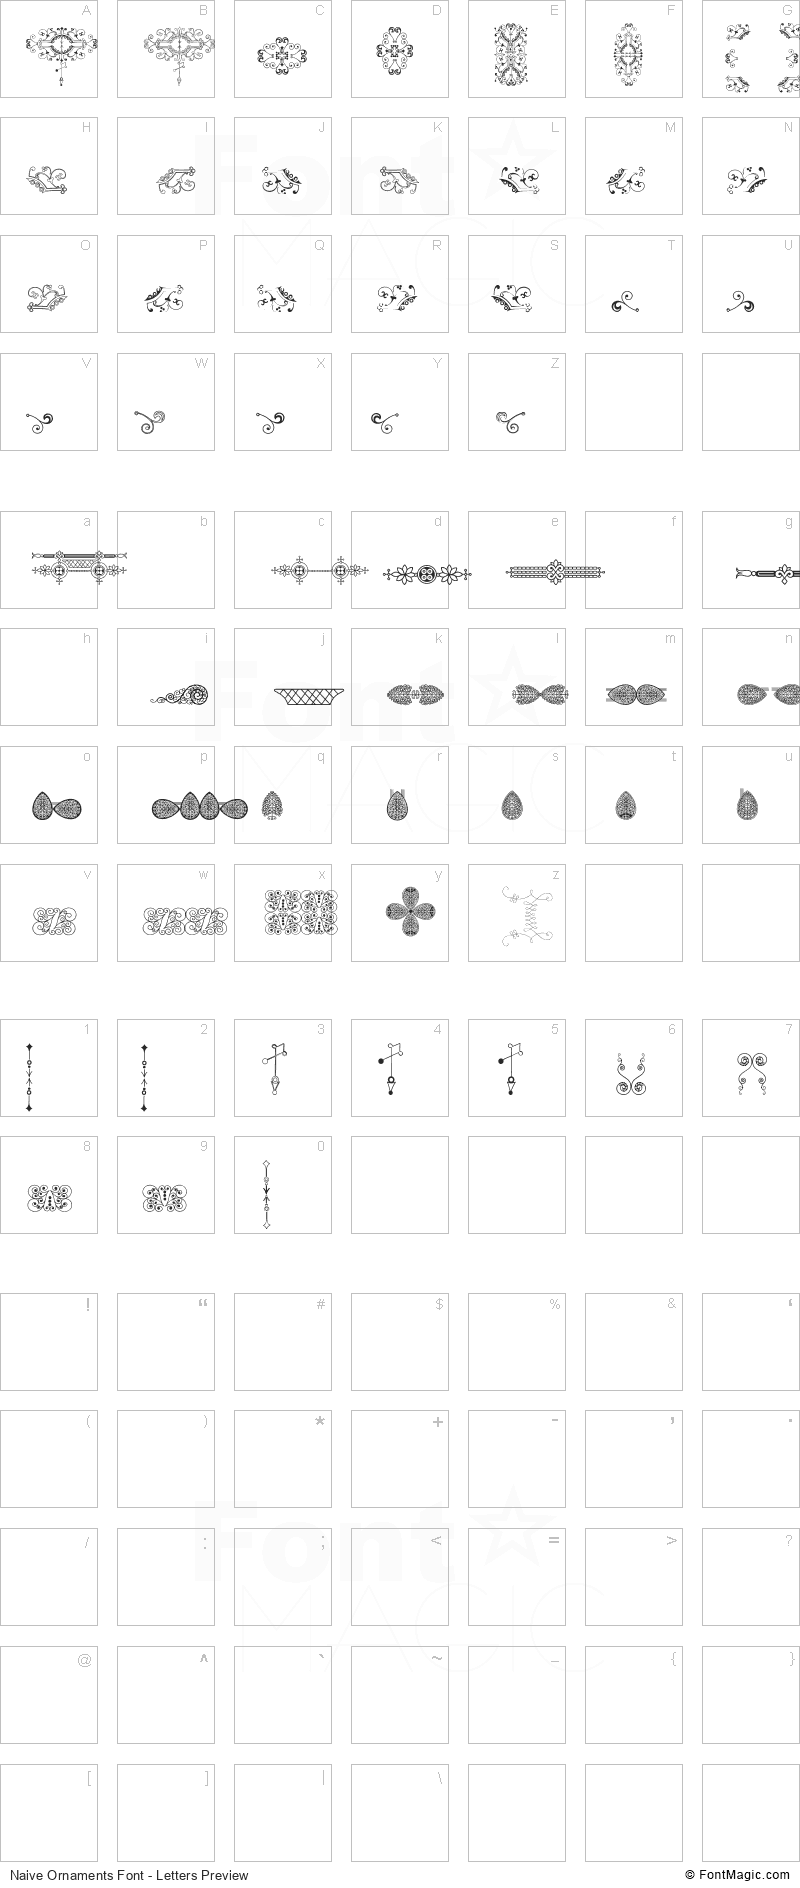 Naive Ornaments Font - All Latters Preview Chart